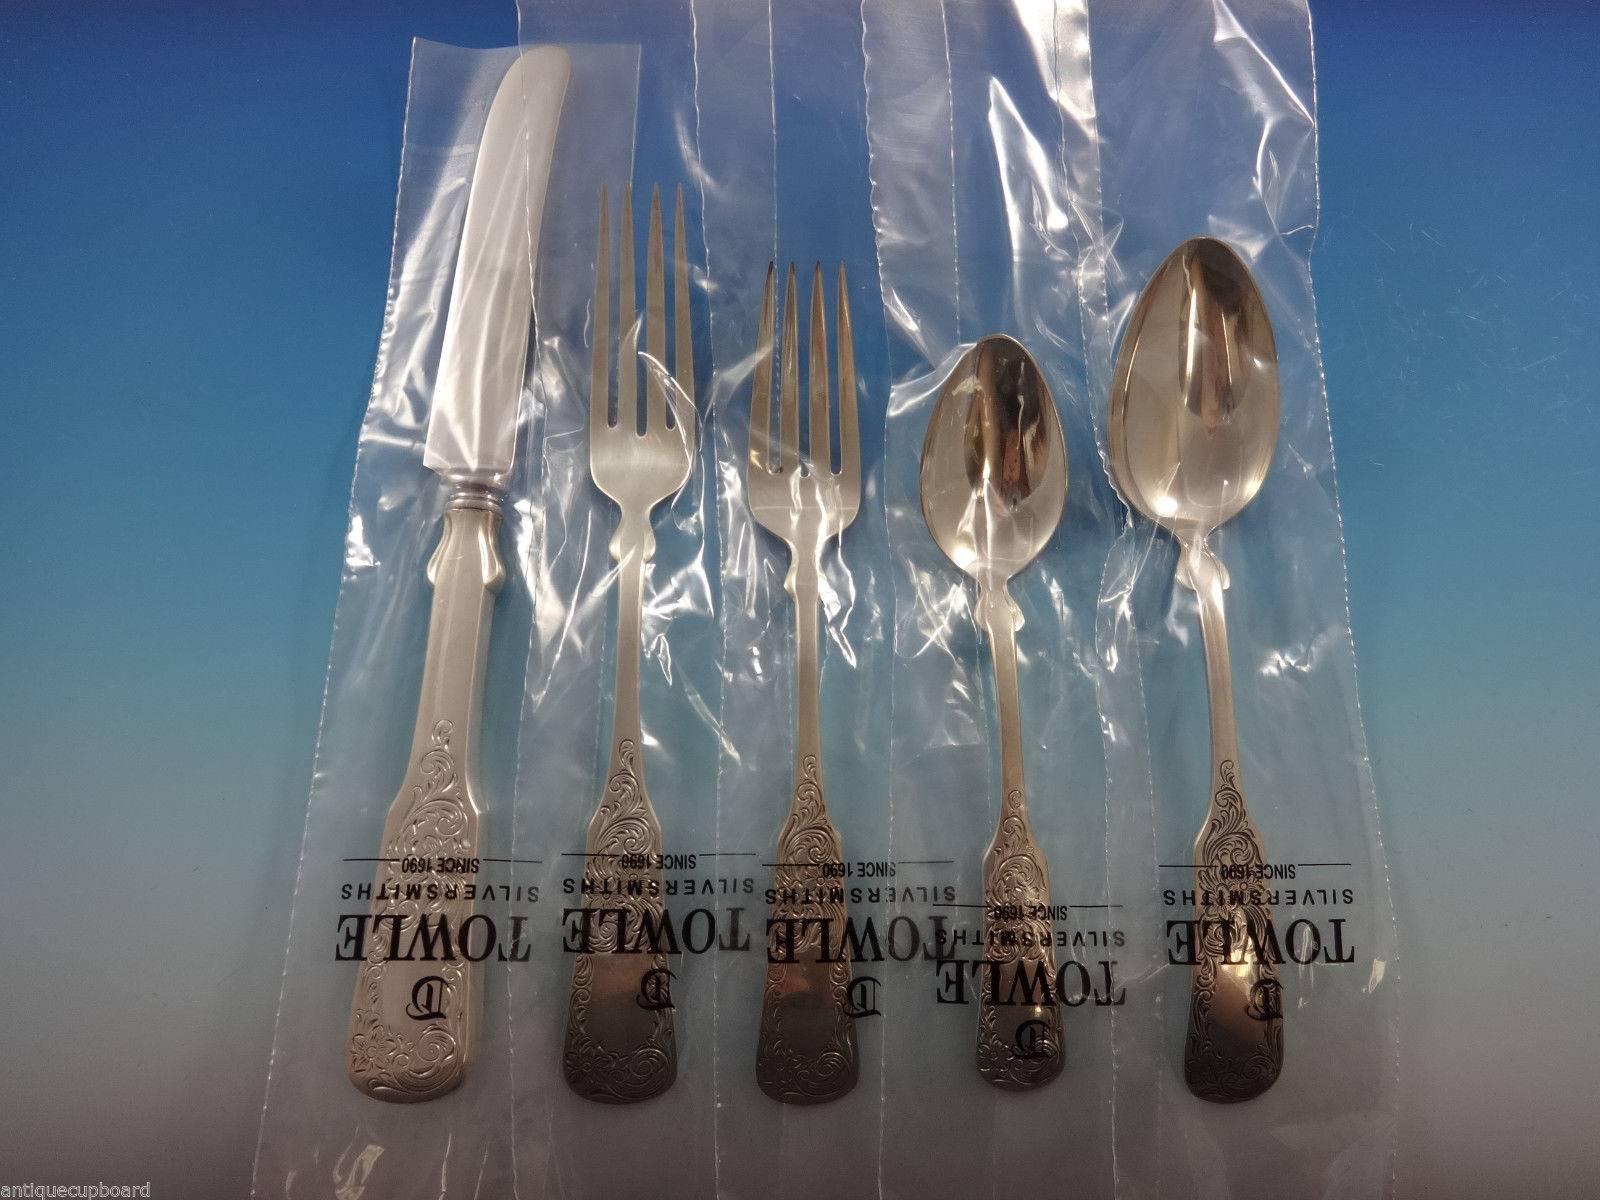 Beautiful Sixteen-Ni​Nety engraved by Towle sterling silver flatware set - 64 pieces. This set is still in the factory sleeves and includes:

12 place knives, 9 1/2